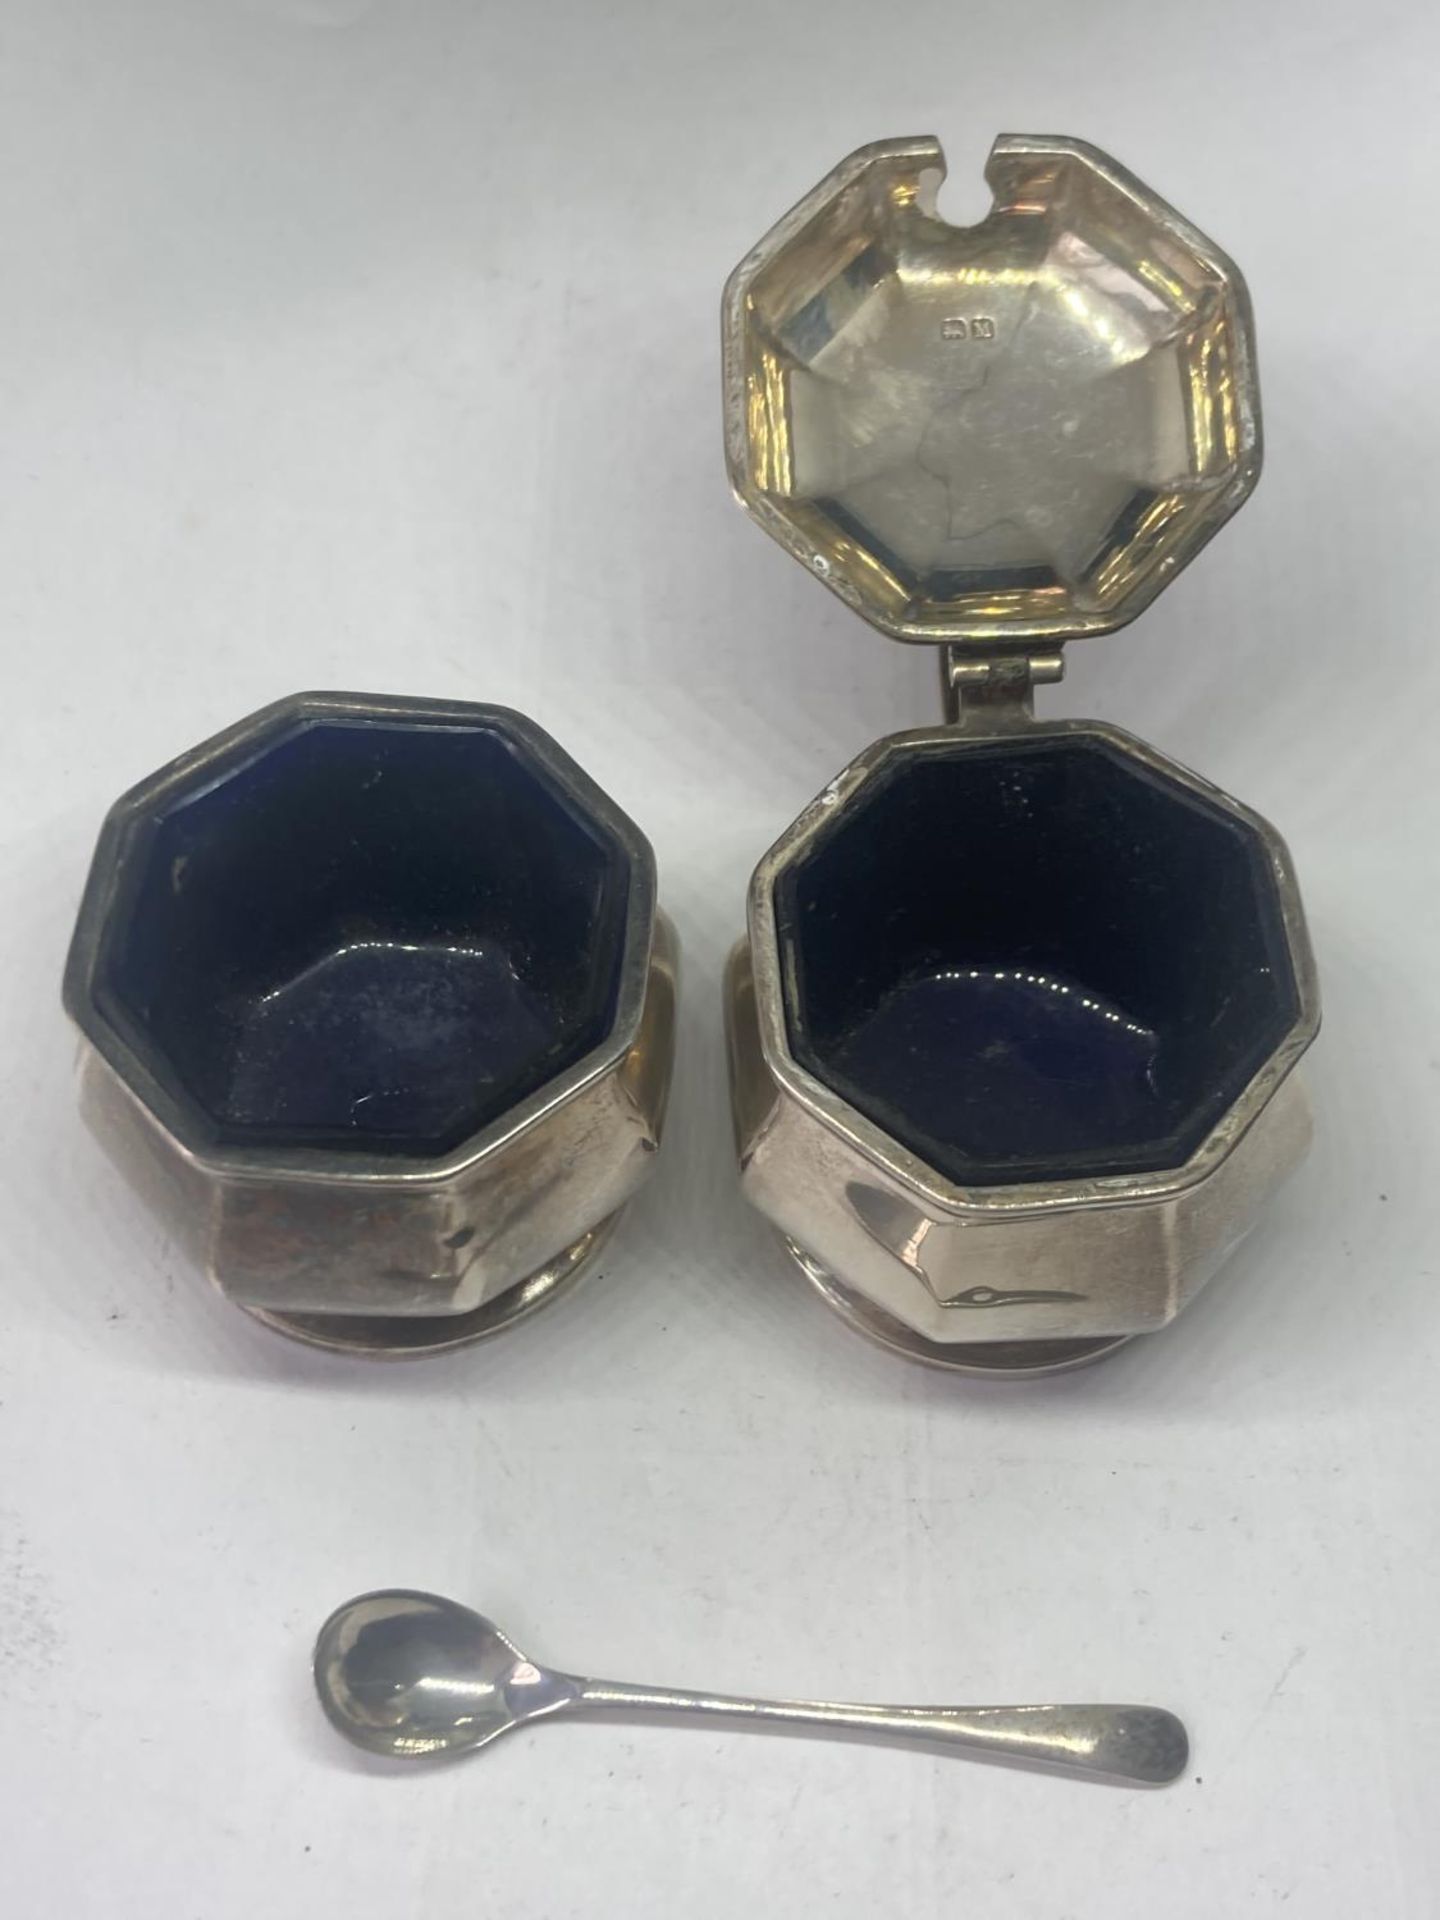 THREE HALLMARKED BIRMINGHAM SILVER ITEMS TO INCLUDE TWO CRUETS WITH BLUE GLASS LINERS AND A SPOON - Image 4 of 8